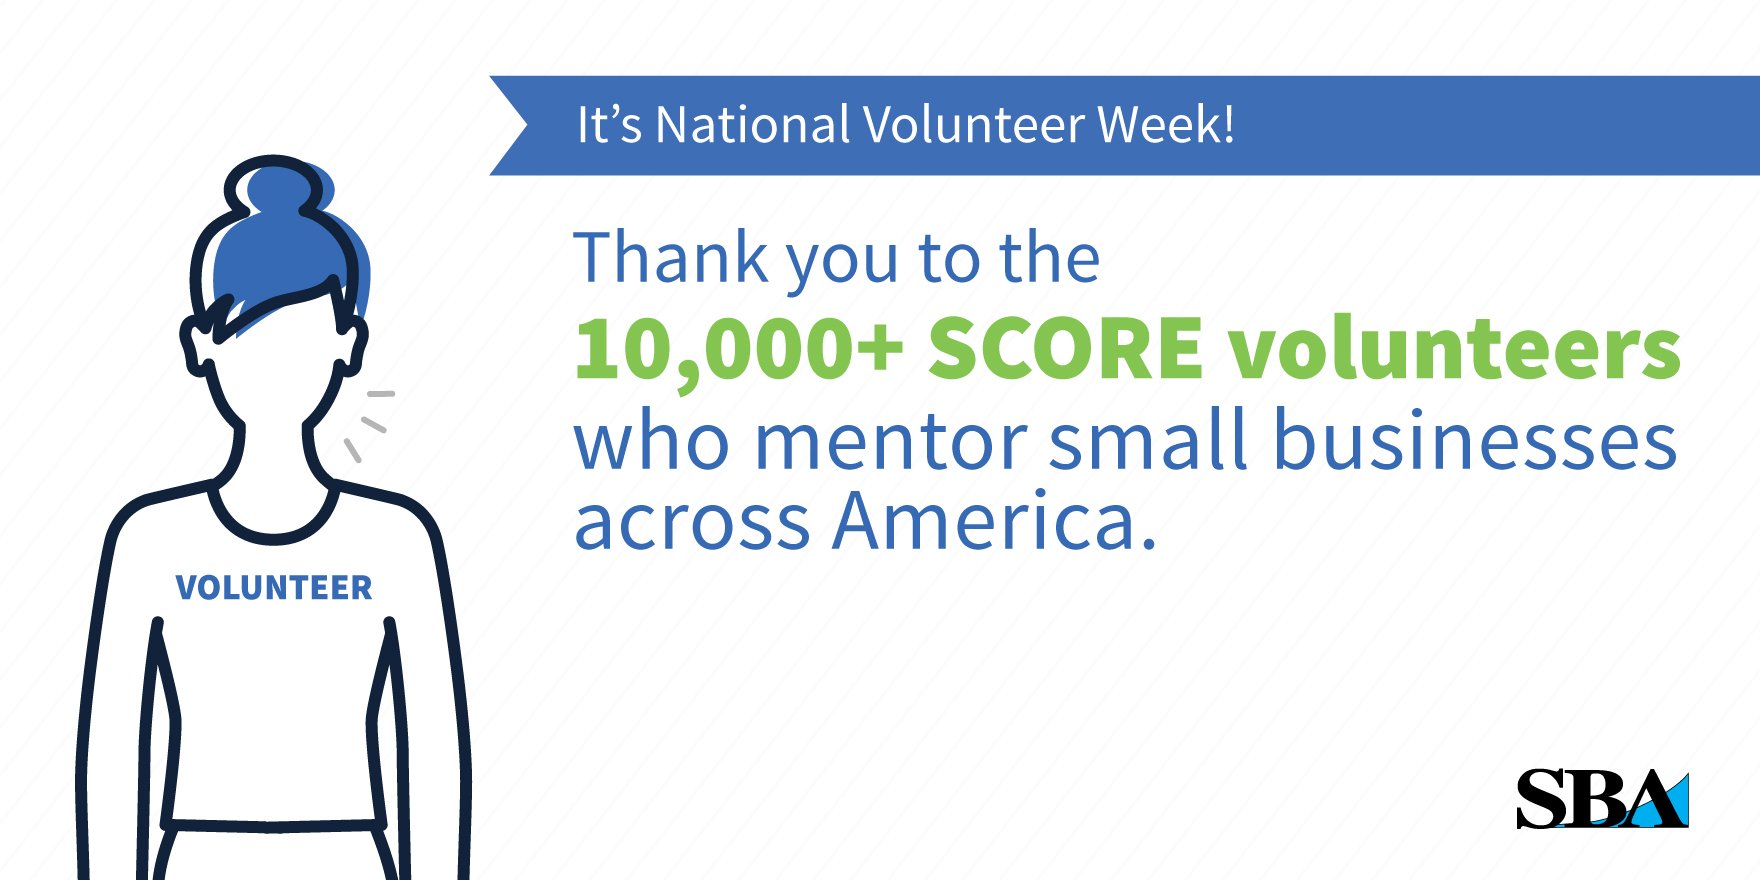 ShopSmall on Twitter: "DYK small businesses with mentors have a higher success rate? you, @SCOREMentors for volunteering your expertise! Find a business mentor https://t.co/EfxUpGF68g. #NationalVolunteerWeek https://t.co/gXHhbnQxWS" / Twitter